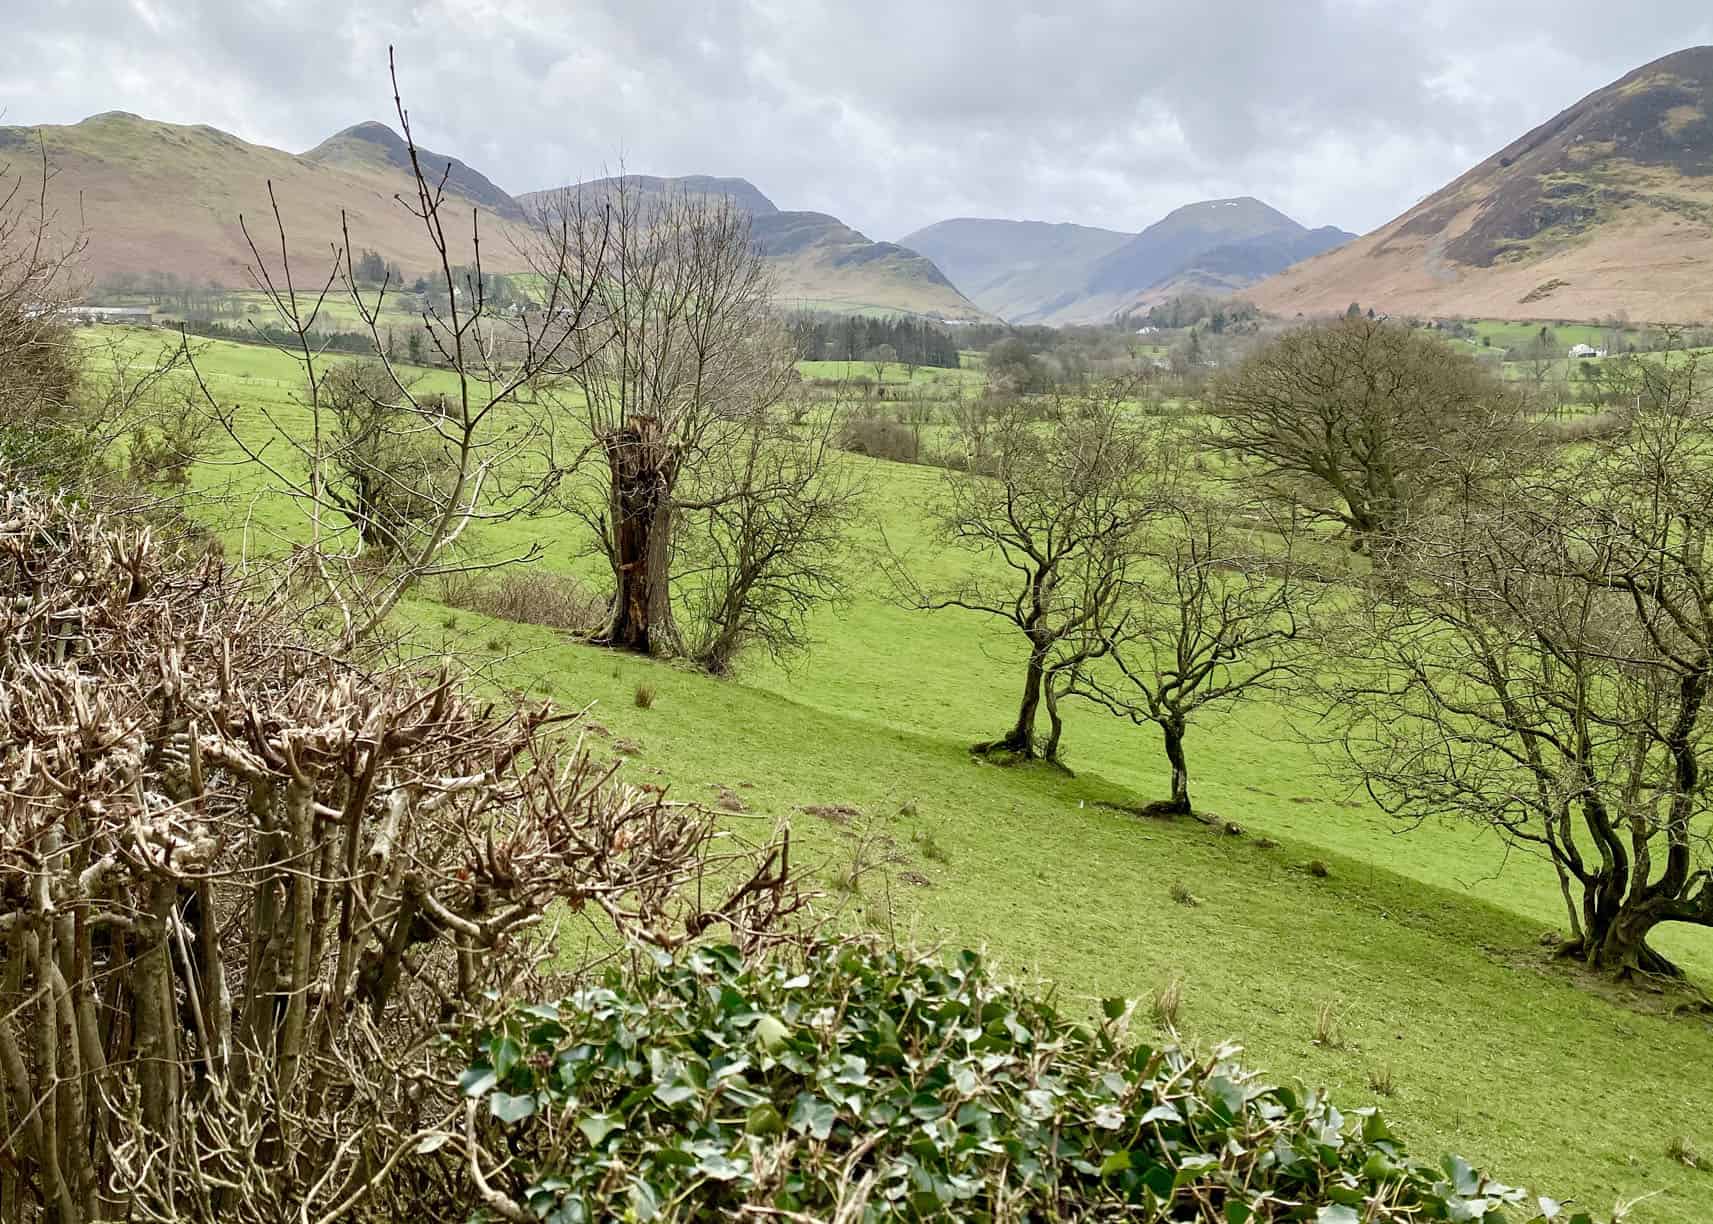 The view south from Swinside across the Newlands valley, soon after the start of the Causey Pike walk. The four highest peaks, from left to right, are Cat Bells, Maiden Moor, Dale Head and Hindscarth.